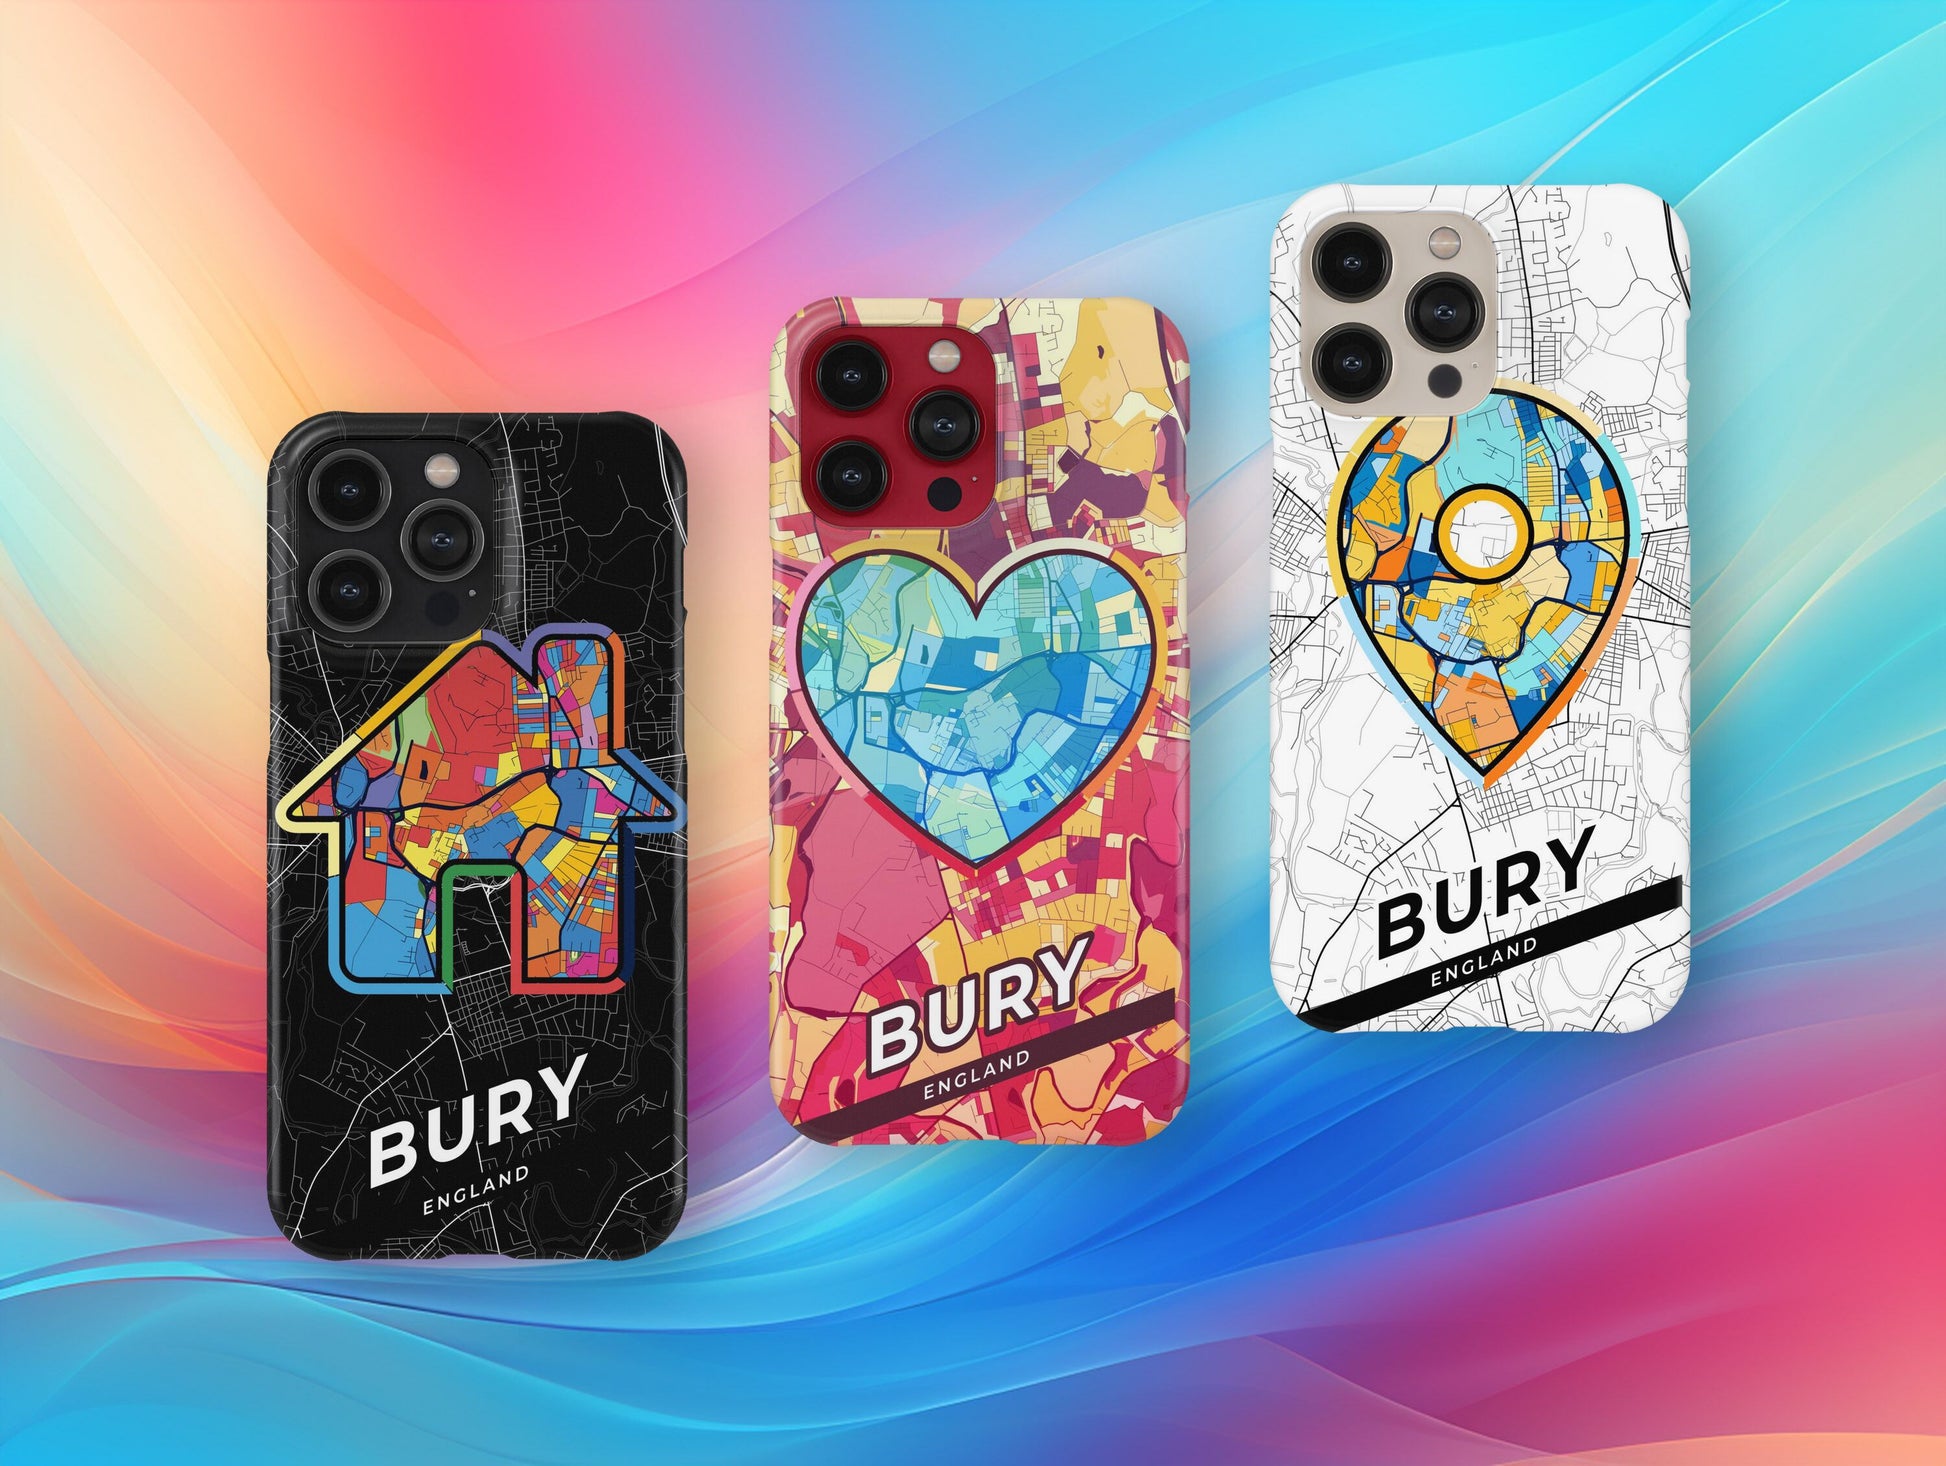 Bury England slim phone case with colorful icon. Birthday, wedding or housewarming gift. Couple match cases.